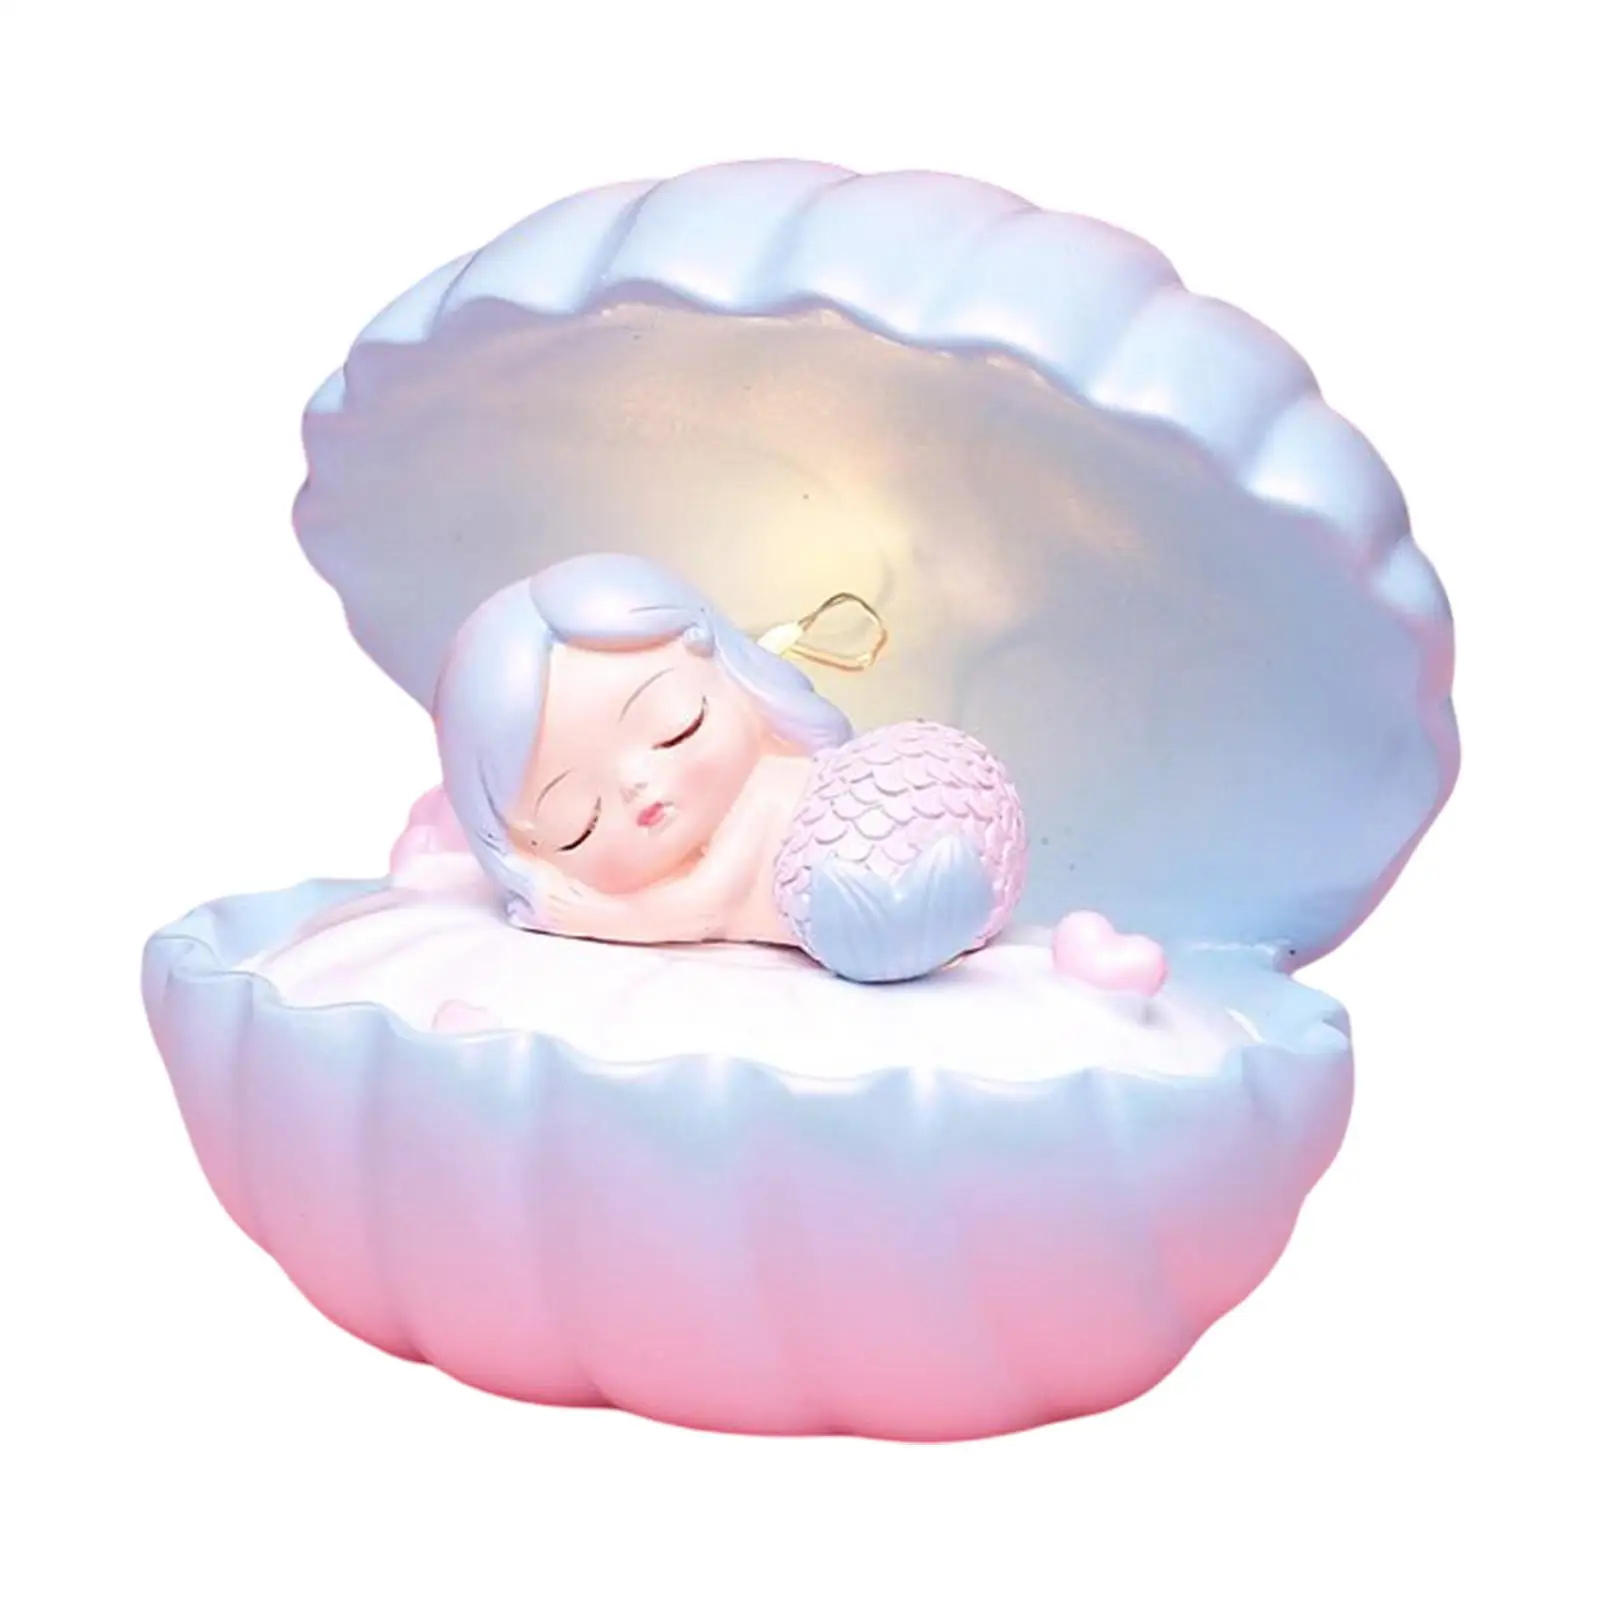 Bedside Lamp Decorative Tabletop Lamps LED Night Light for Breastfeeding Sleeping